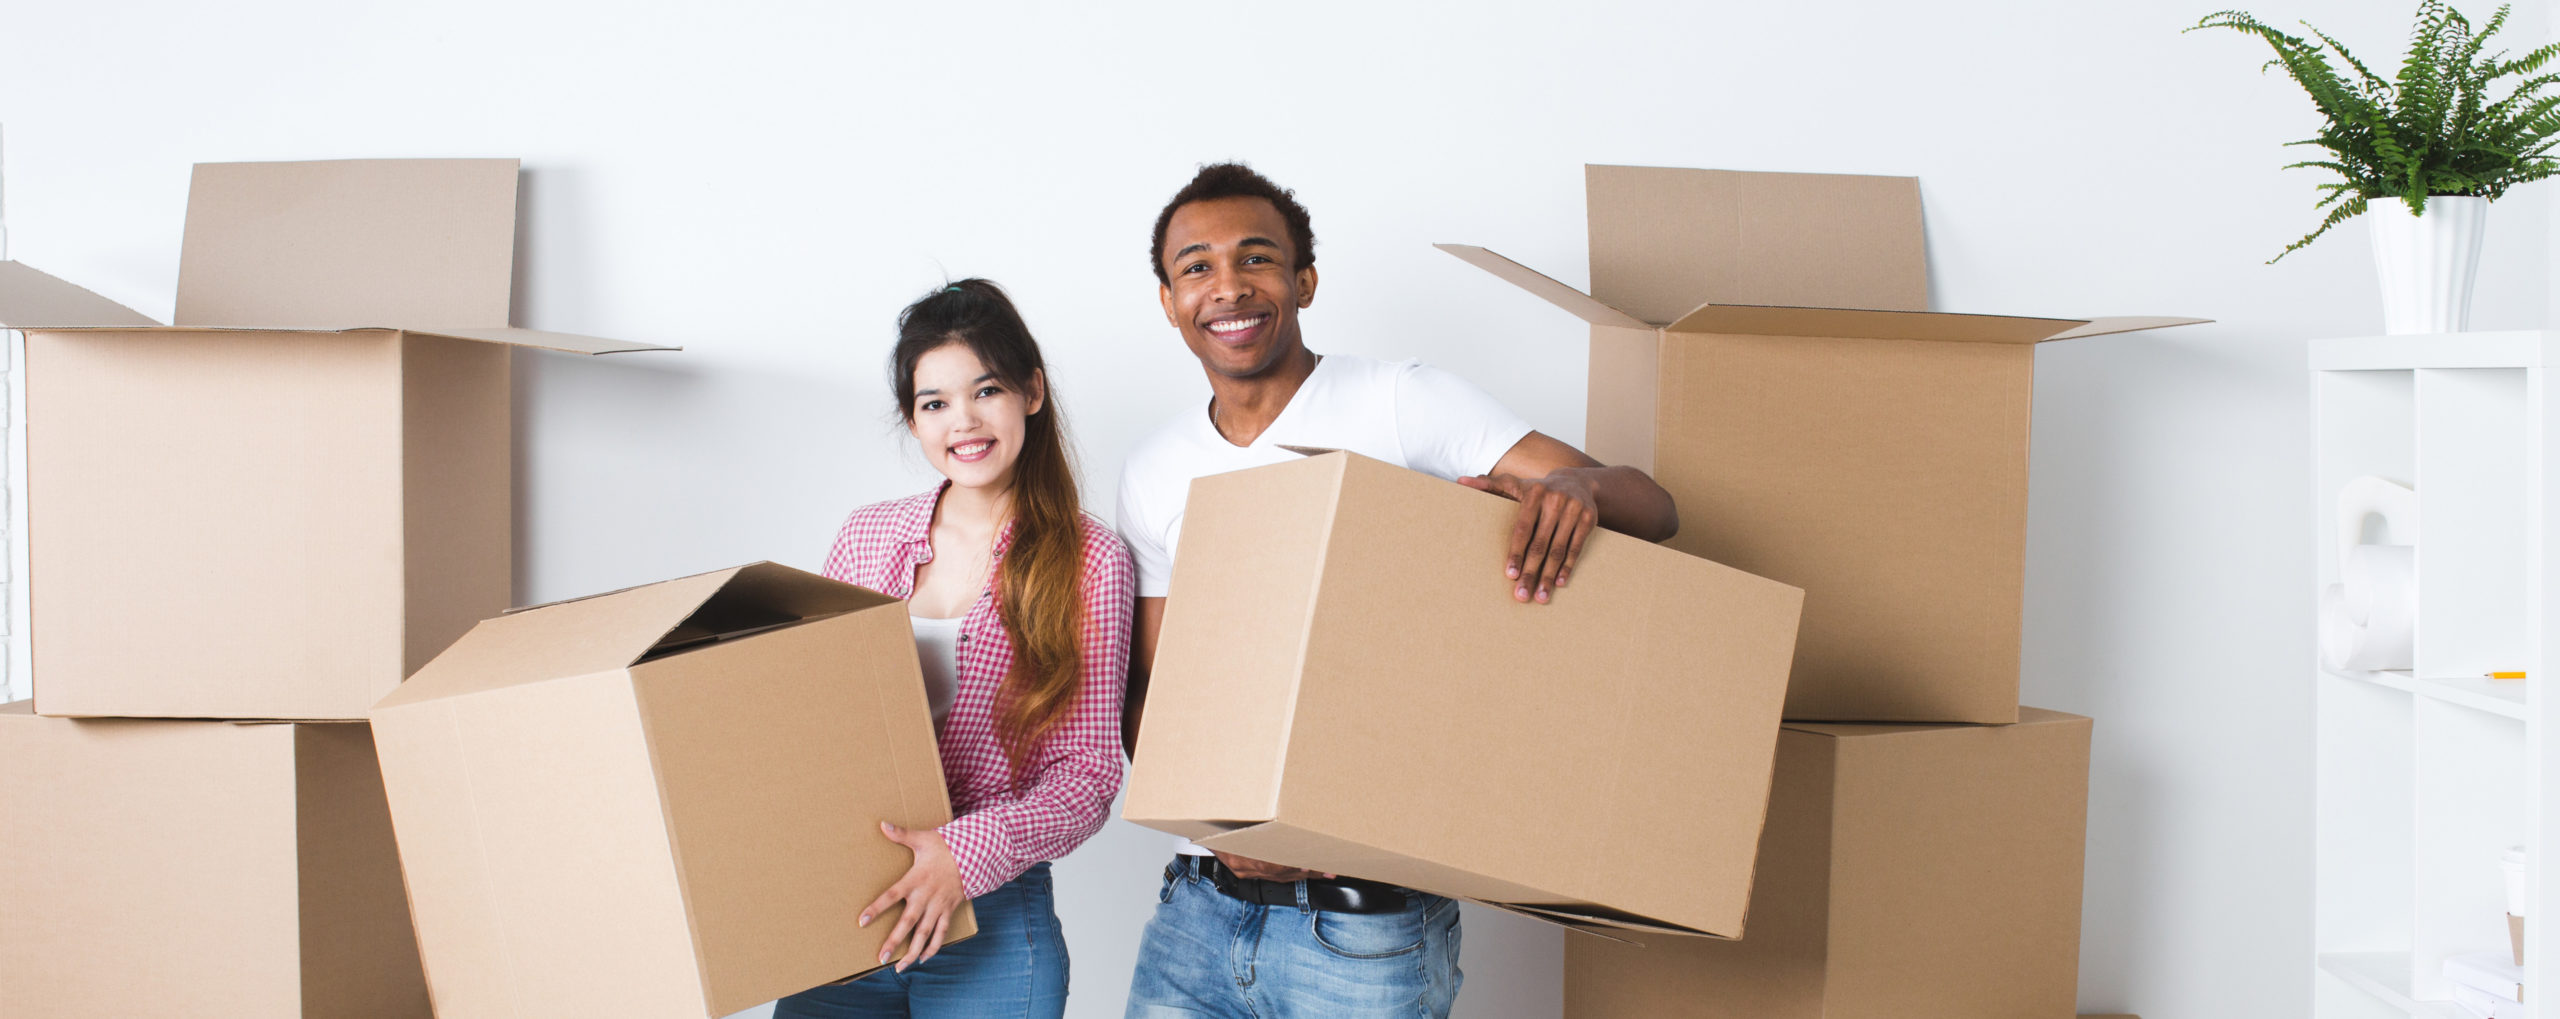 The Search Is Over: What To Expect When You Are Ready To Buy A Home